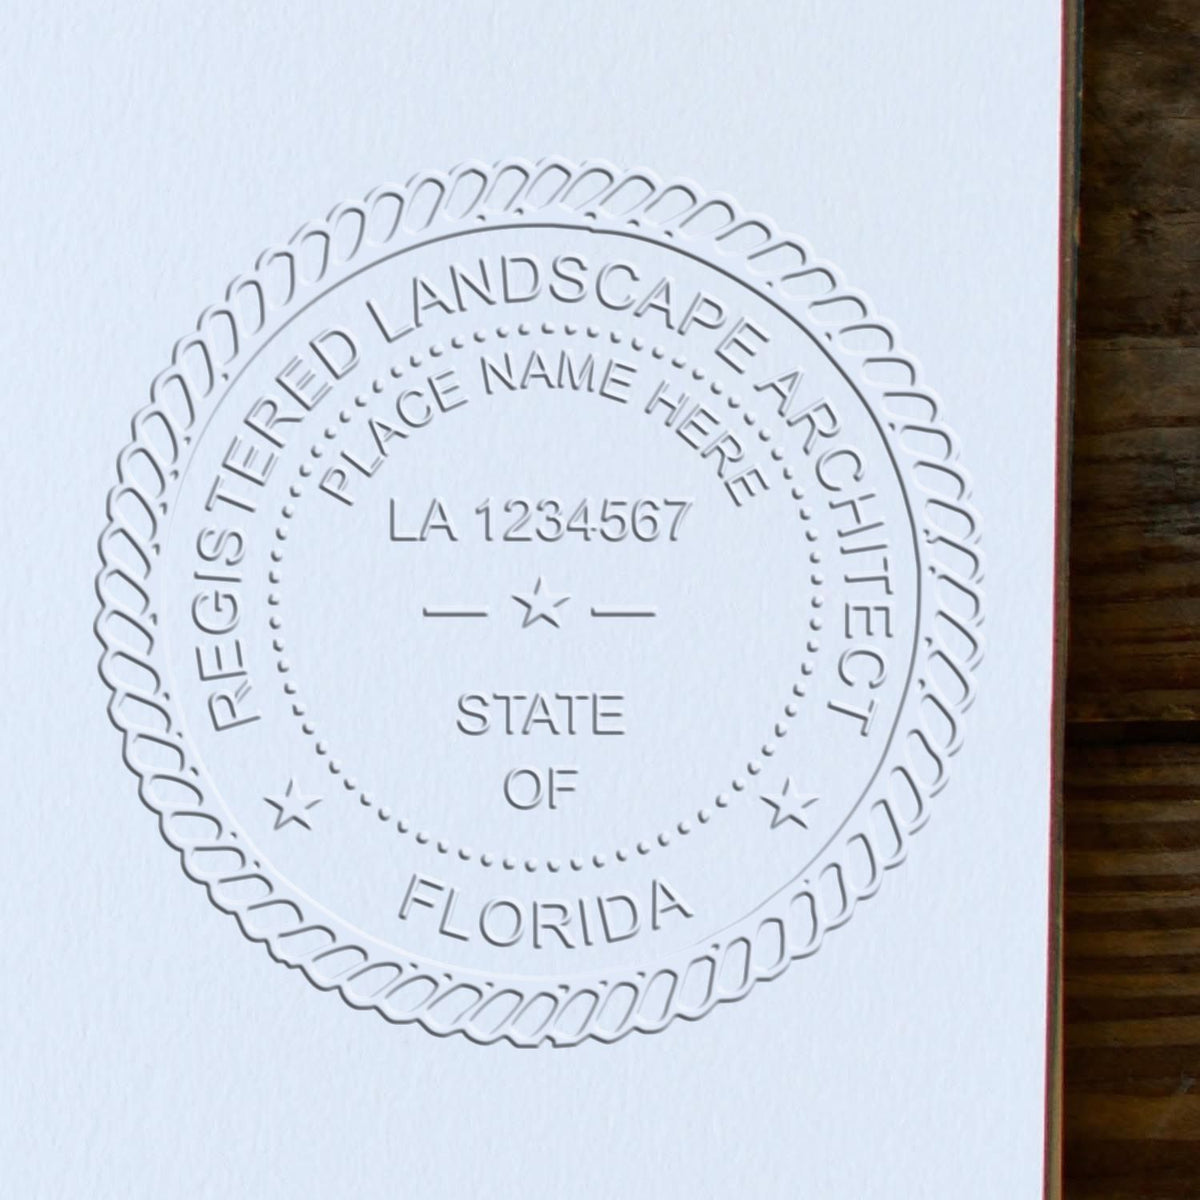 The Soft Pocket Florida Landscape Architect Embosser stamp impression comes to life with a crisp, detailed photo on paper - showcasing true professional quality.